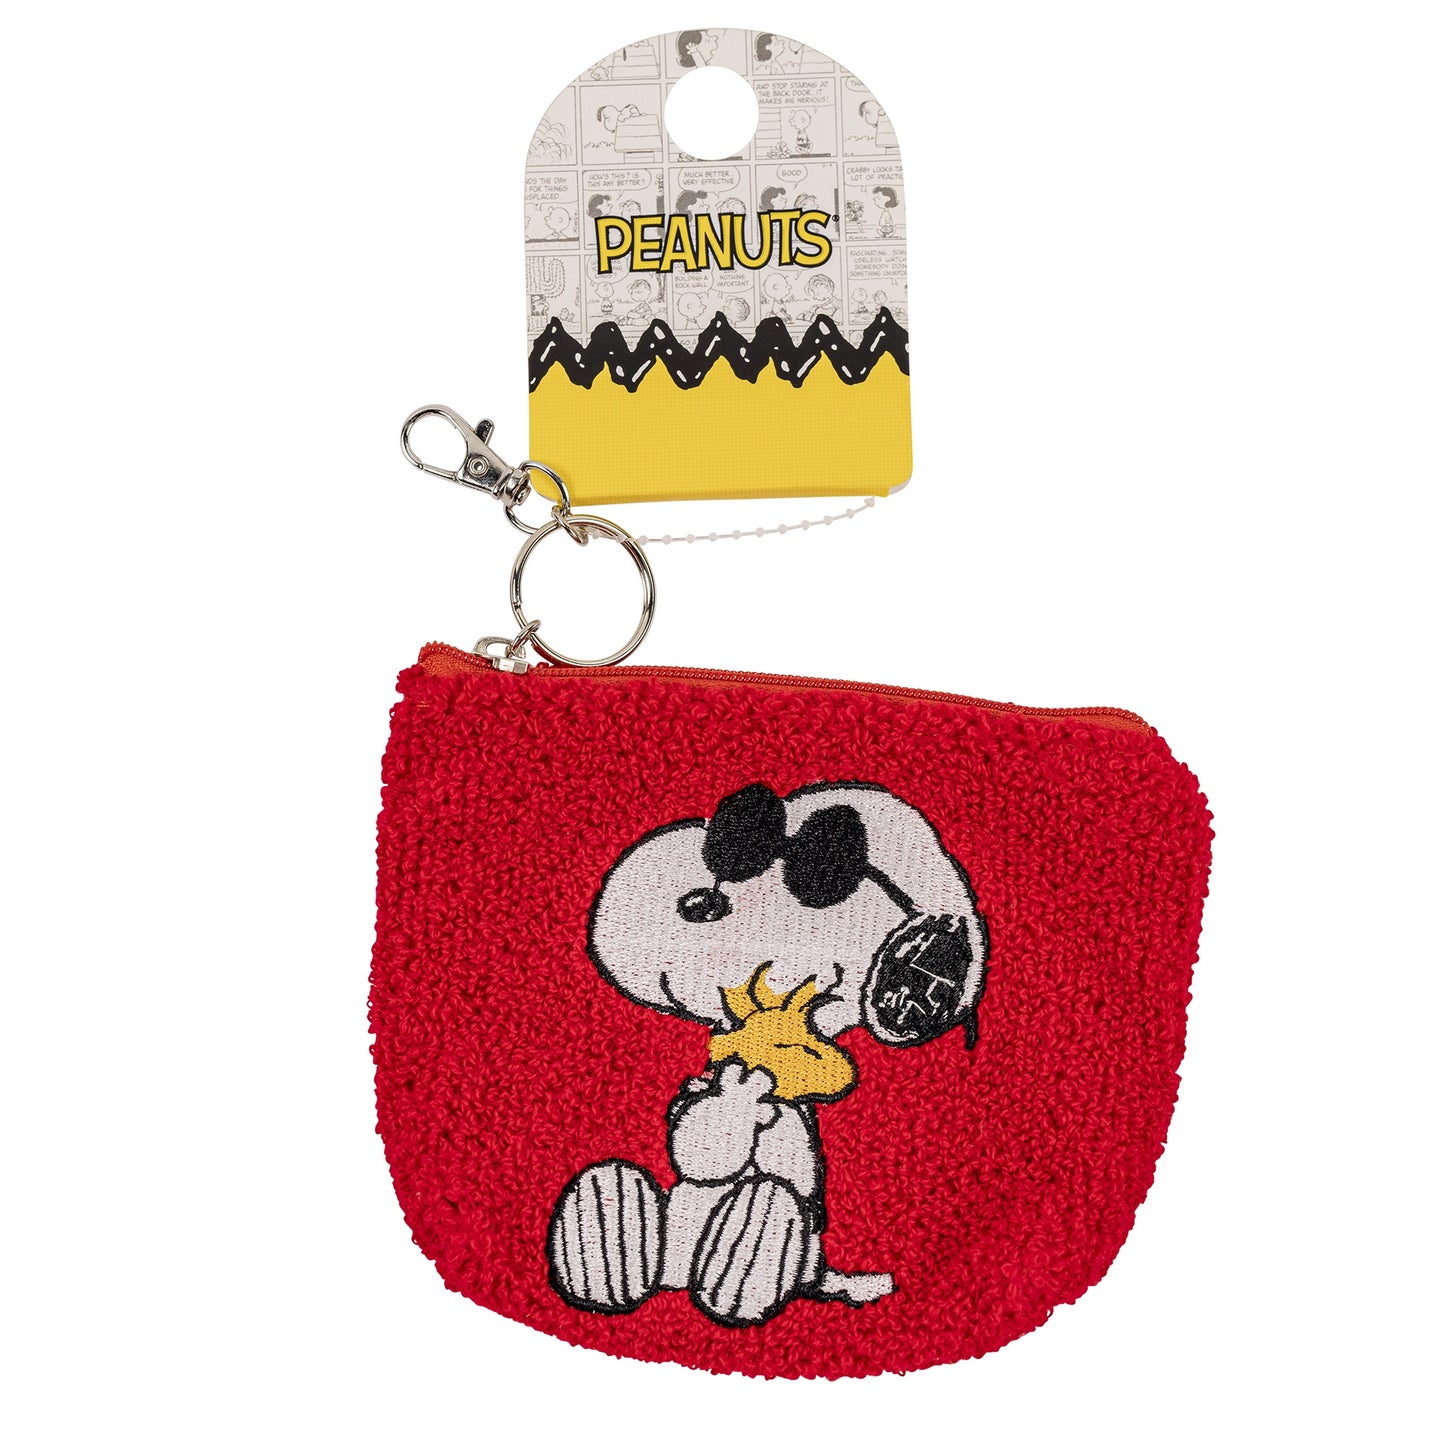 PEANUTS - Snoopy Fluffy Coin Pouch Keychain